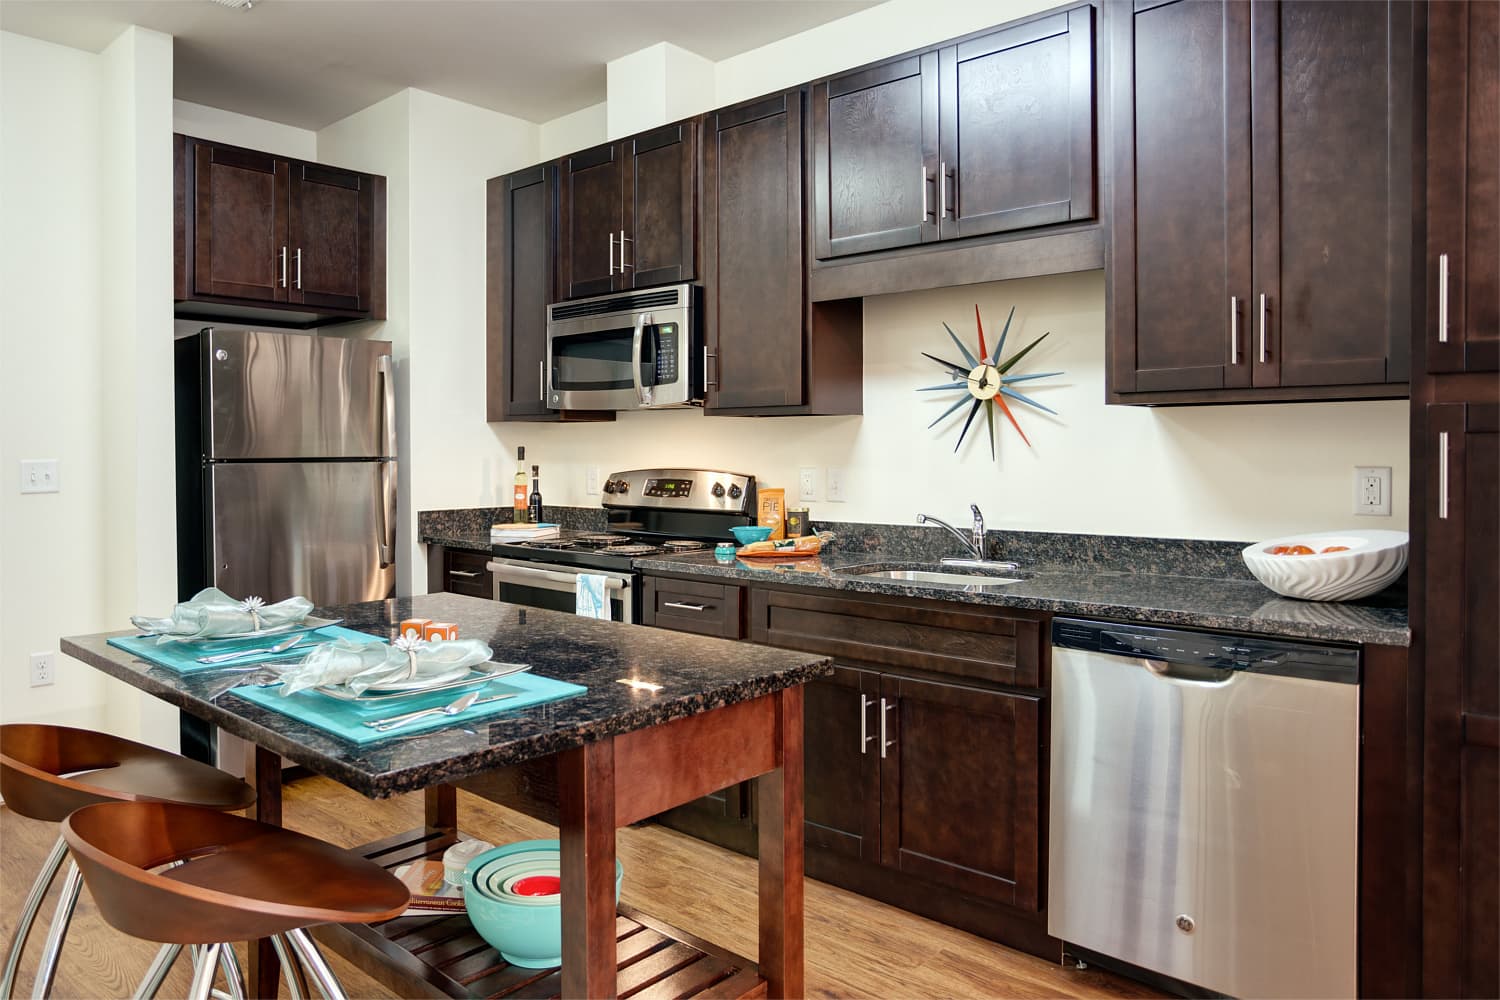 Winthrop : Make yourself at home in an ideal kitchen space.